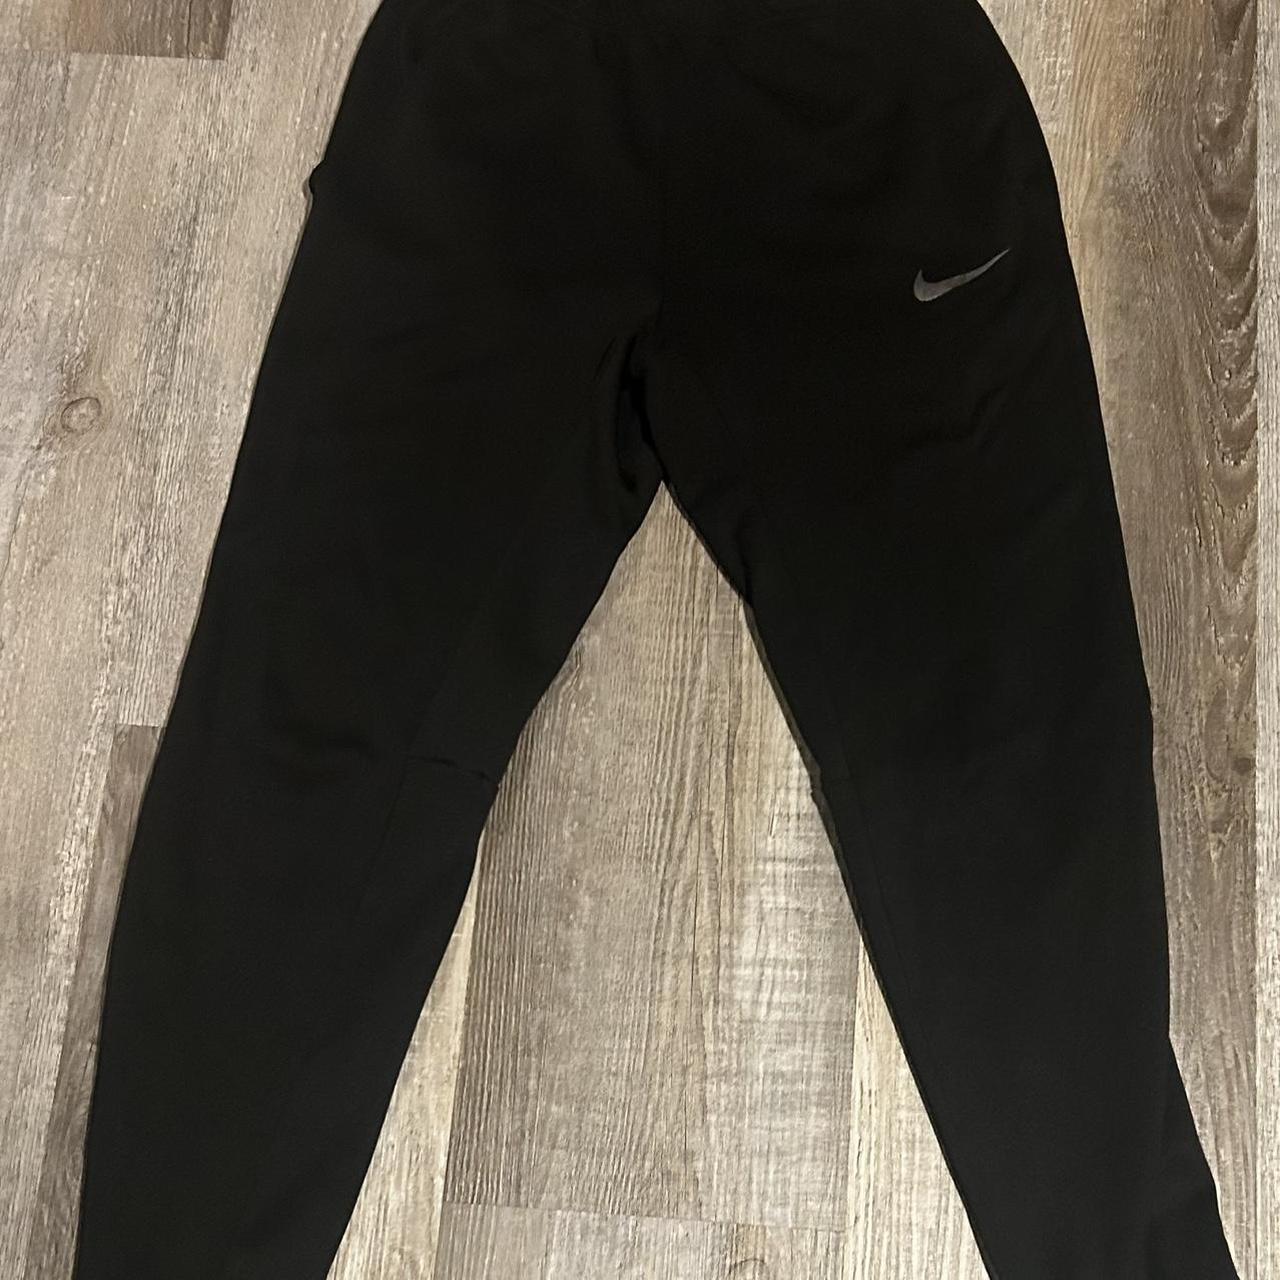 “Nike SweatPants” Text me for more pictures - Depop